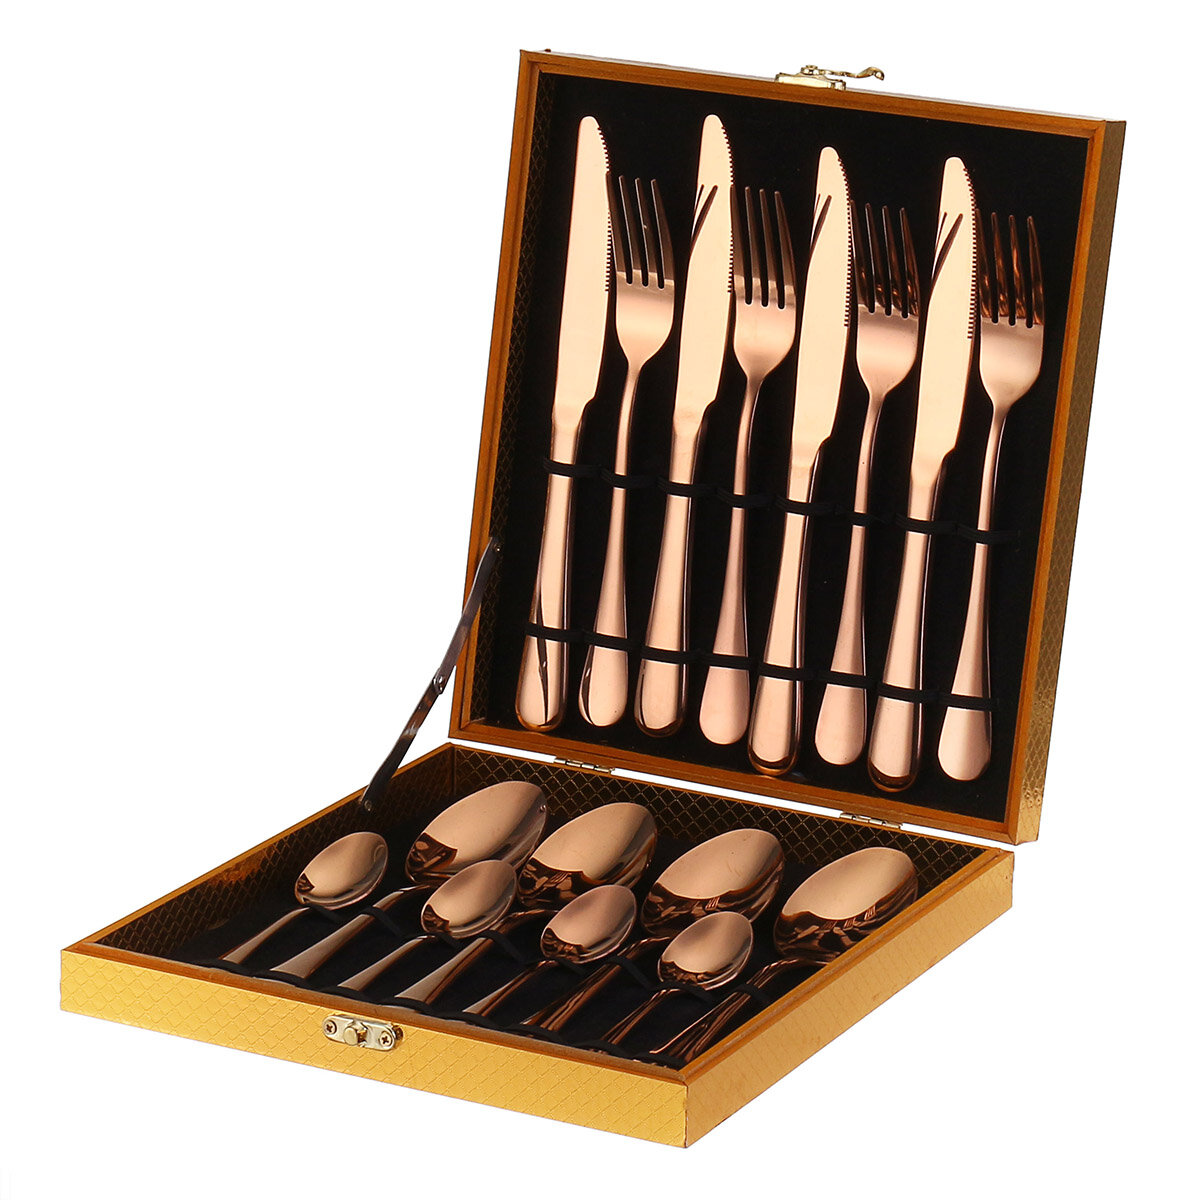 Image of 16PCS Cutlery Set Stainless Steel Rainbow Fork Spoon Kitchen Dinnerware Sets With Storage Box